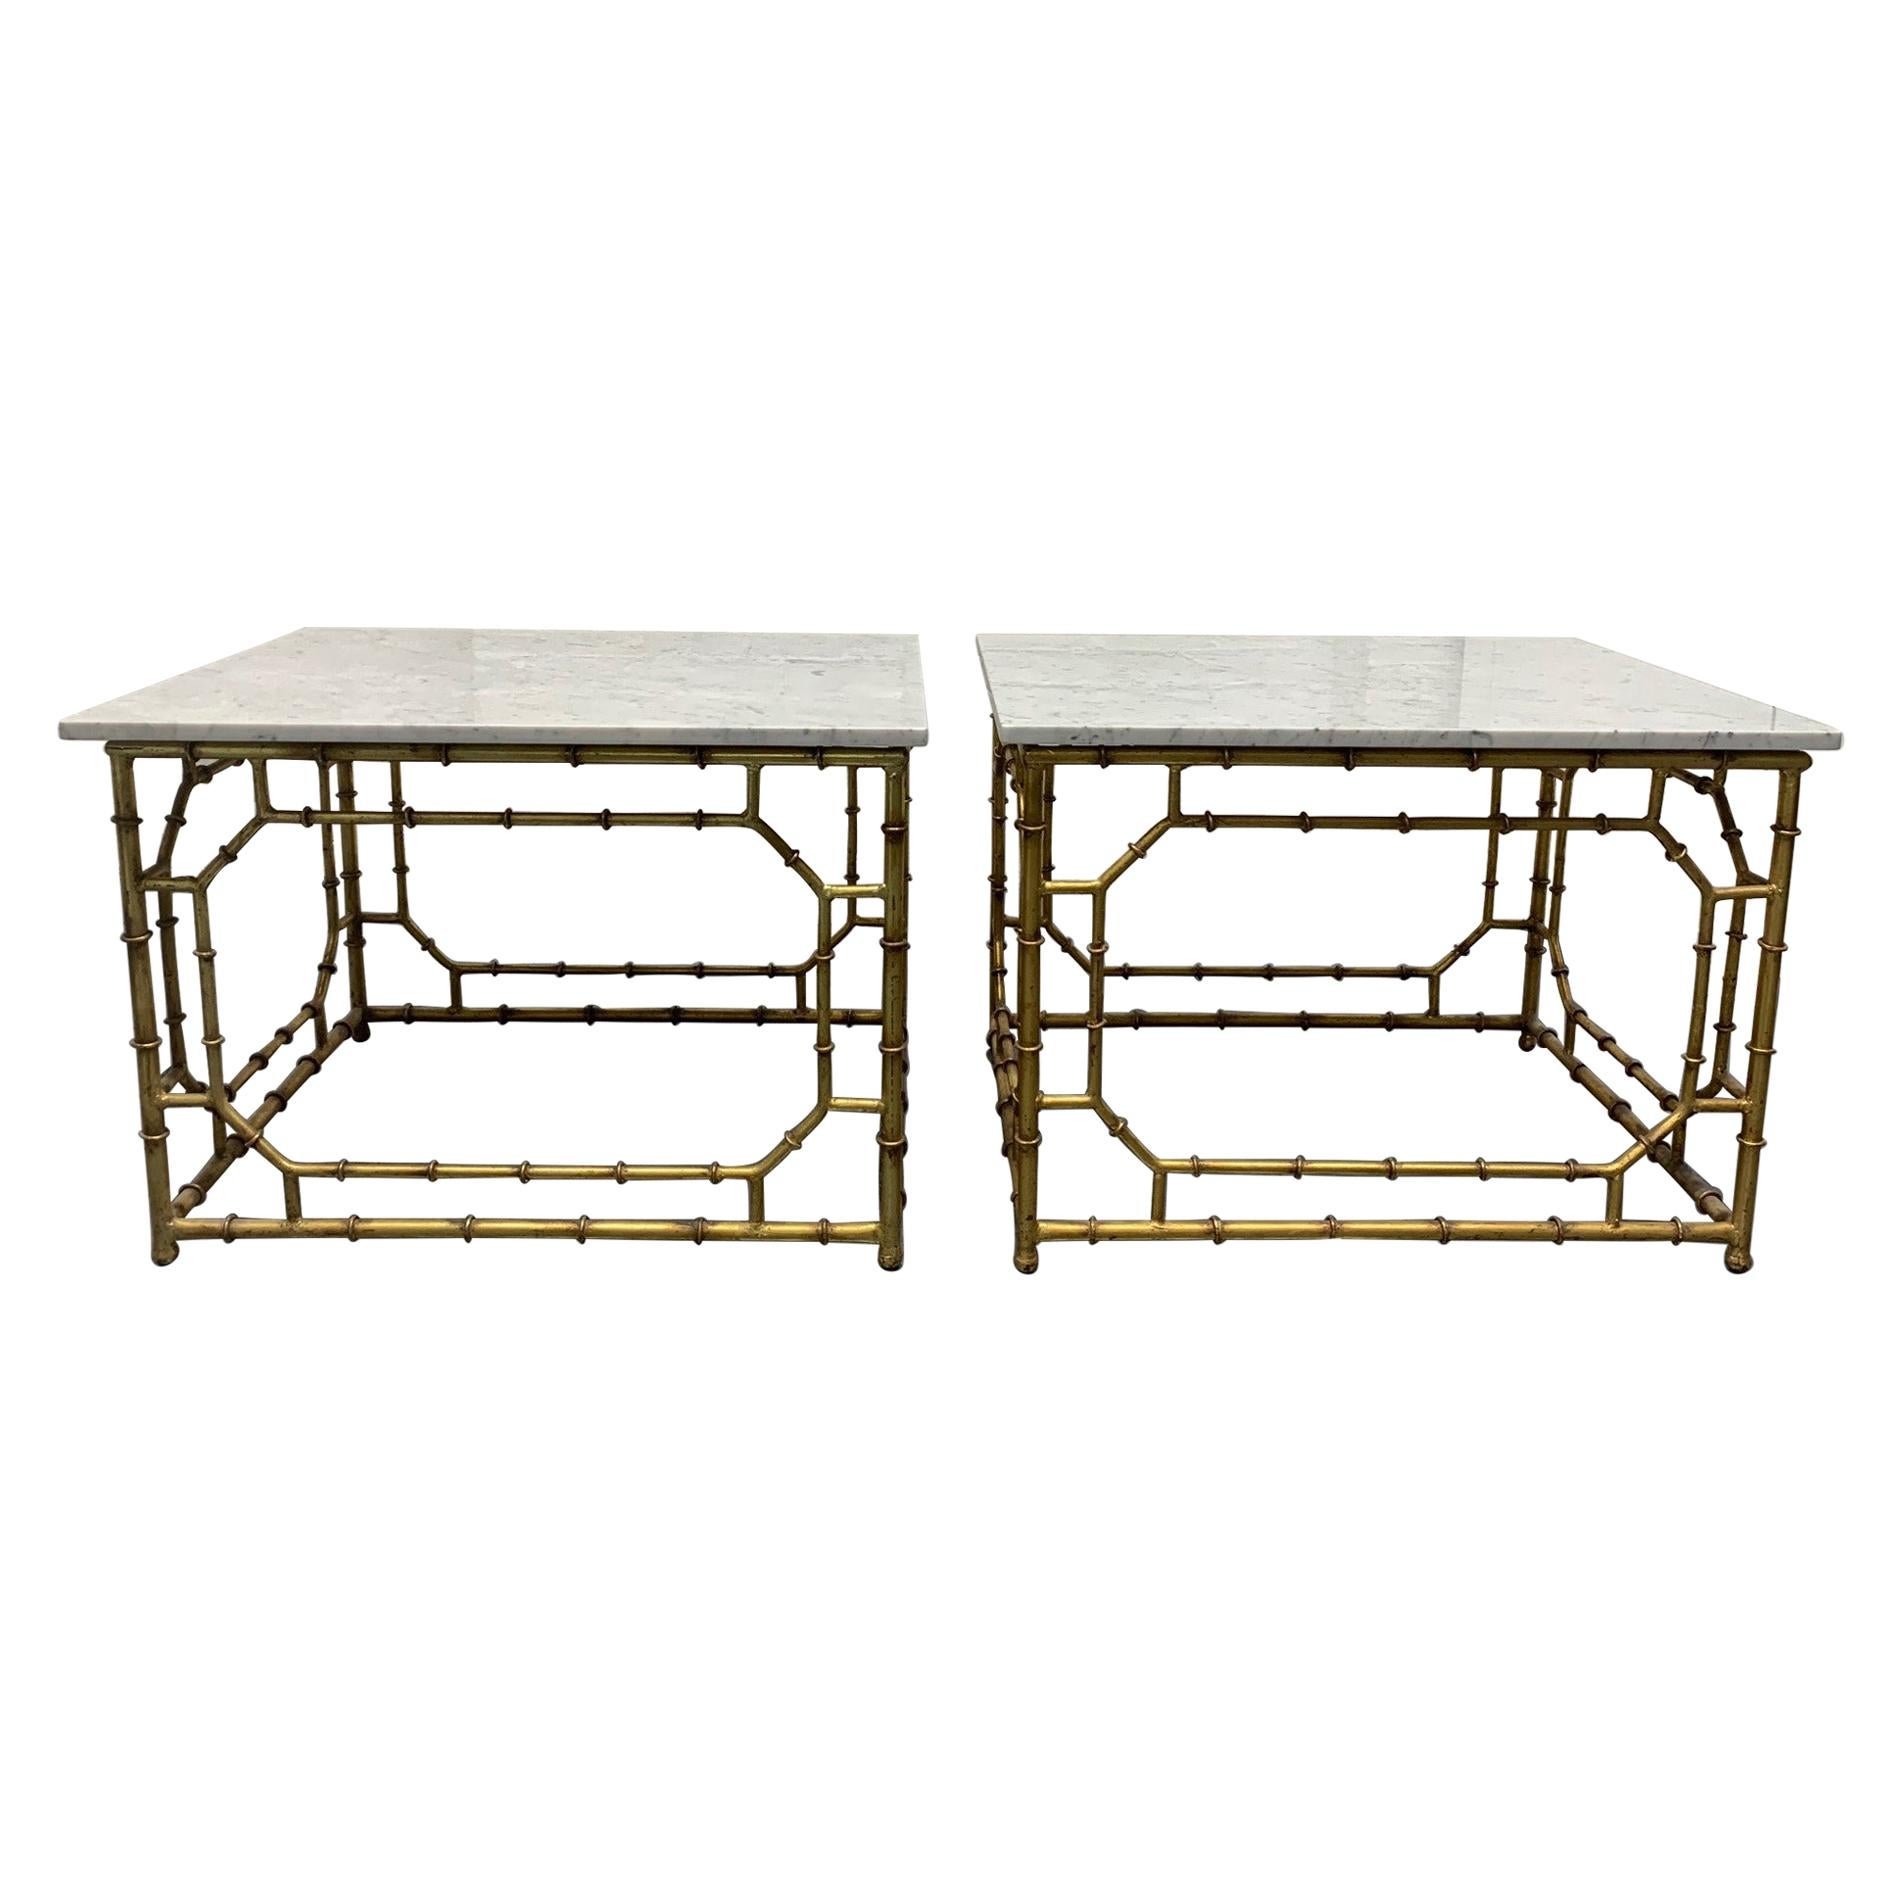 Pair of Hollywood Regency Carrara Marble-Top Faux Bamboo Tables For Sale